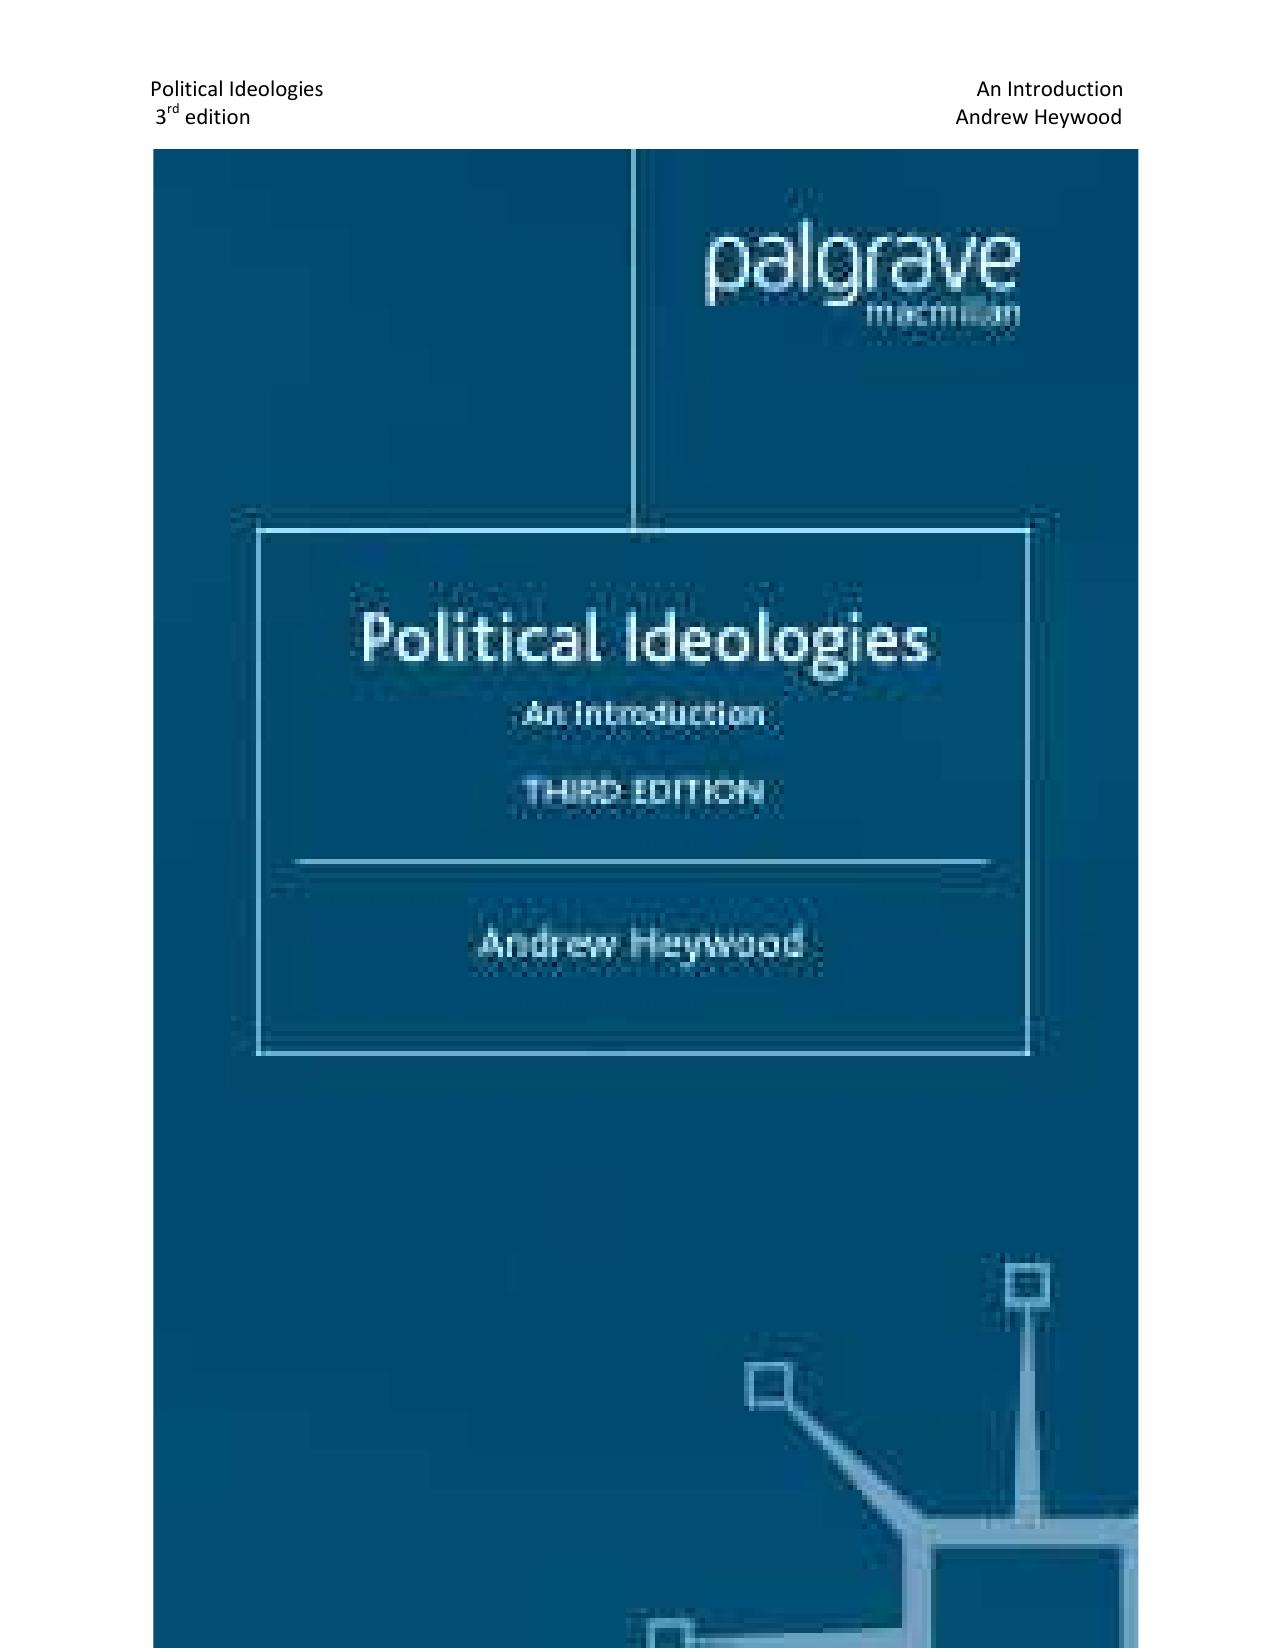 Political Ideologies An Introduction 3rd edition Andrew Heywood 2010